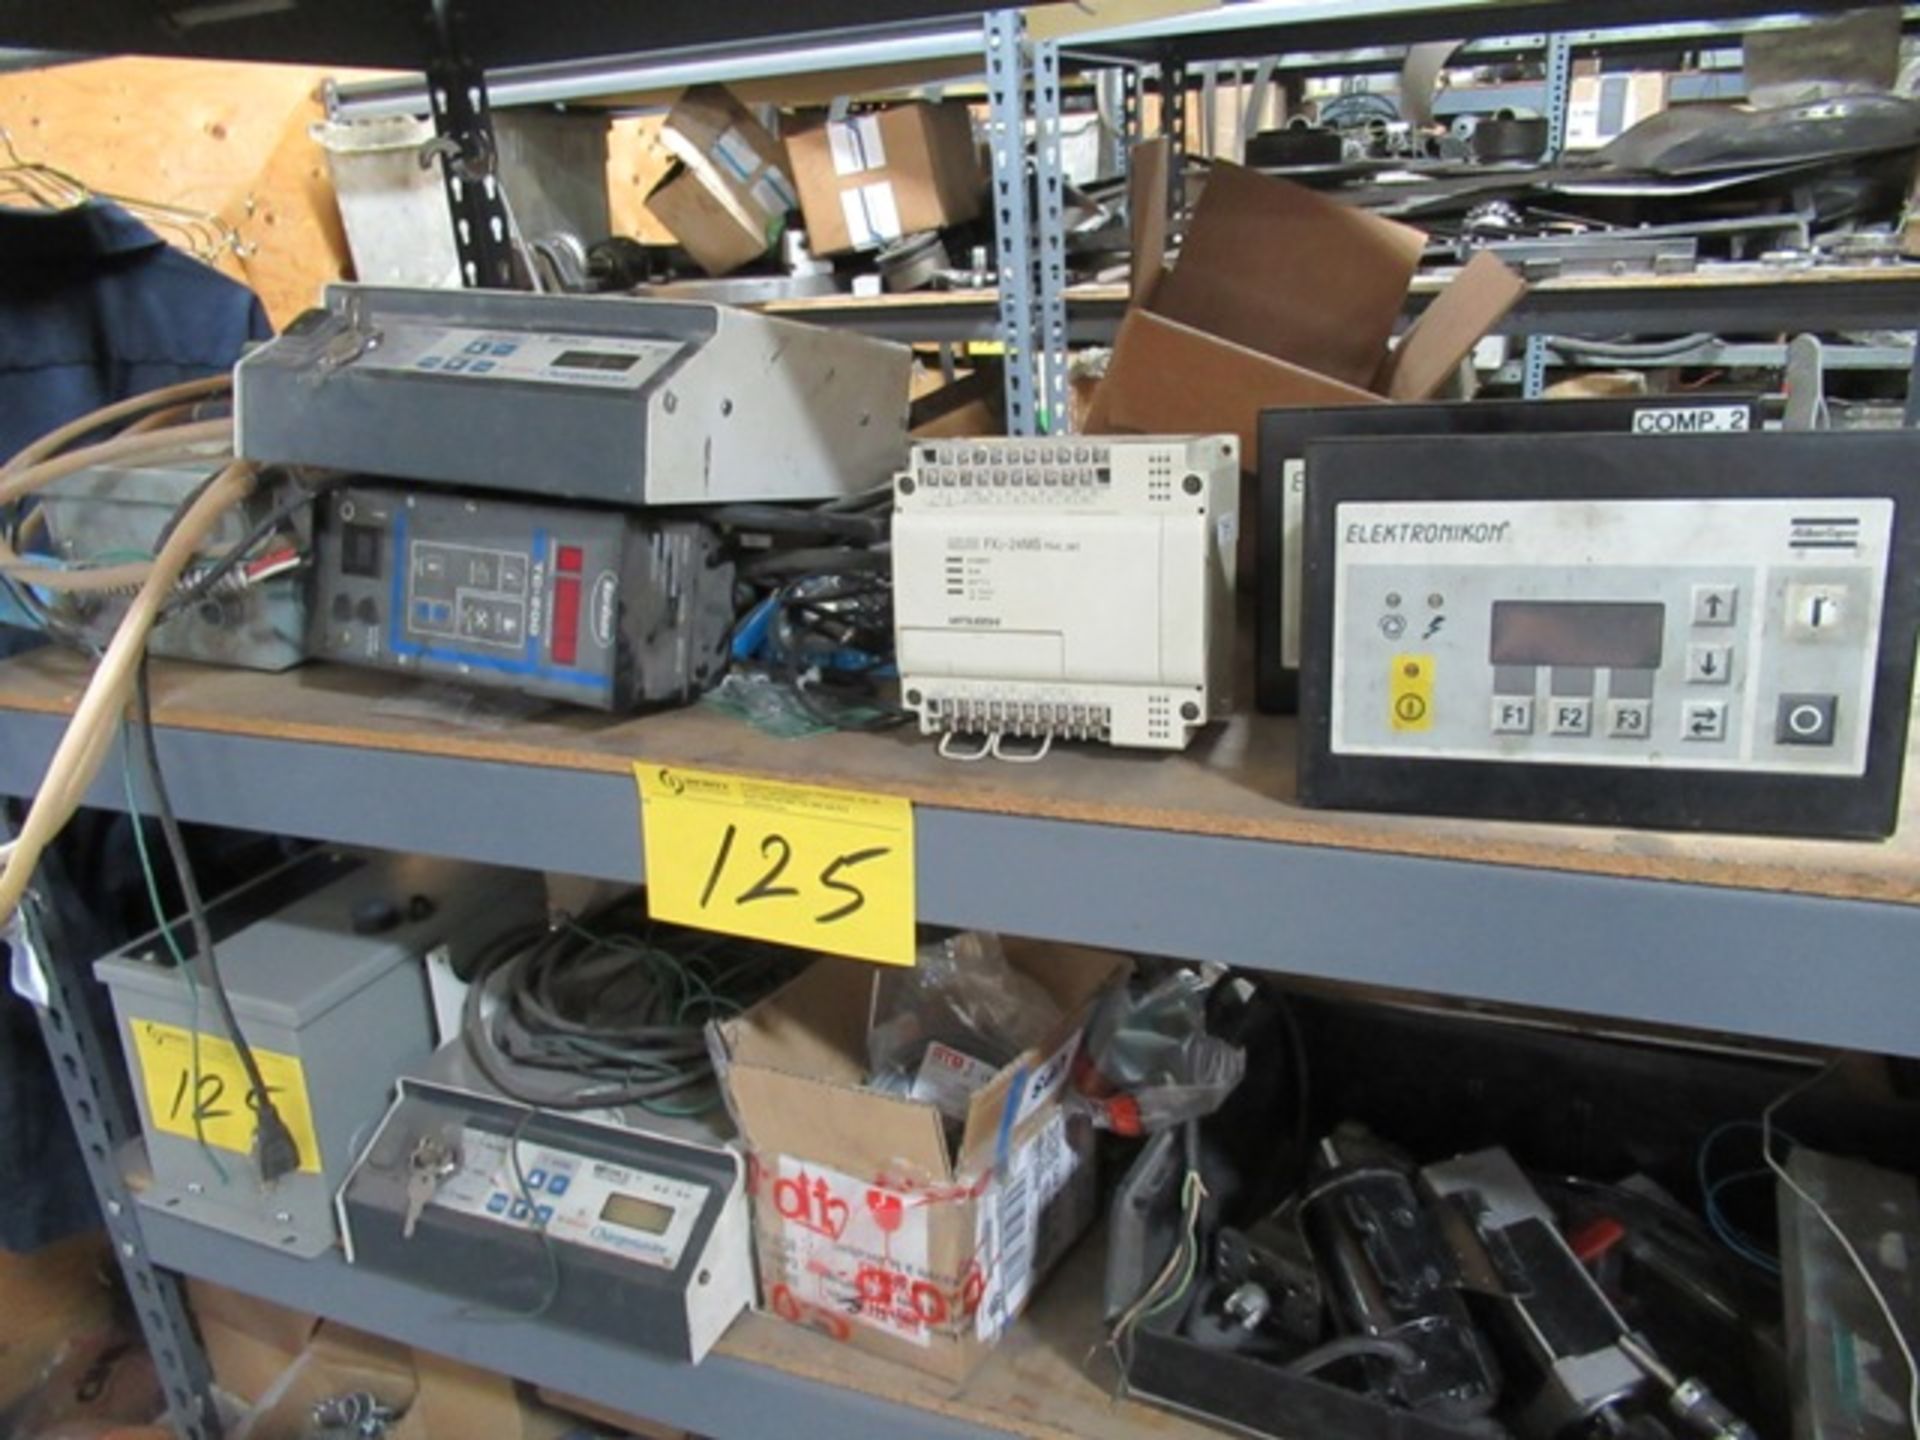 LOT ASST. ELECTRICAL GFC POWER SUPPLY, SIMCO CHARGEMASTER, CONTROLS, ETC. W/SHELF - Image 2 of 4